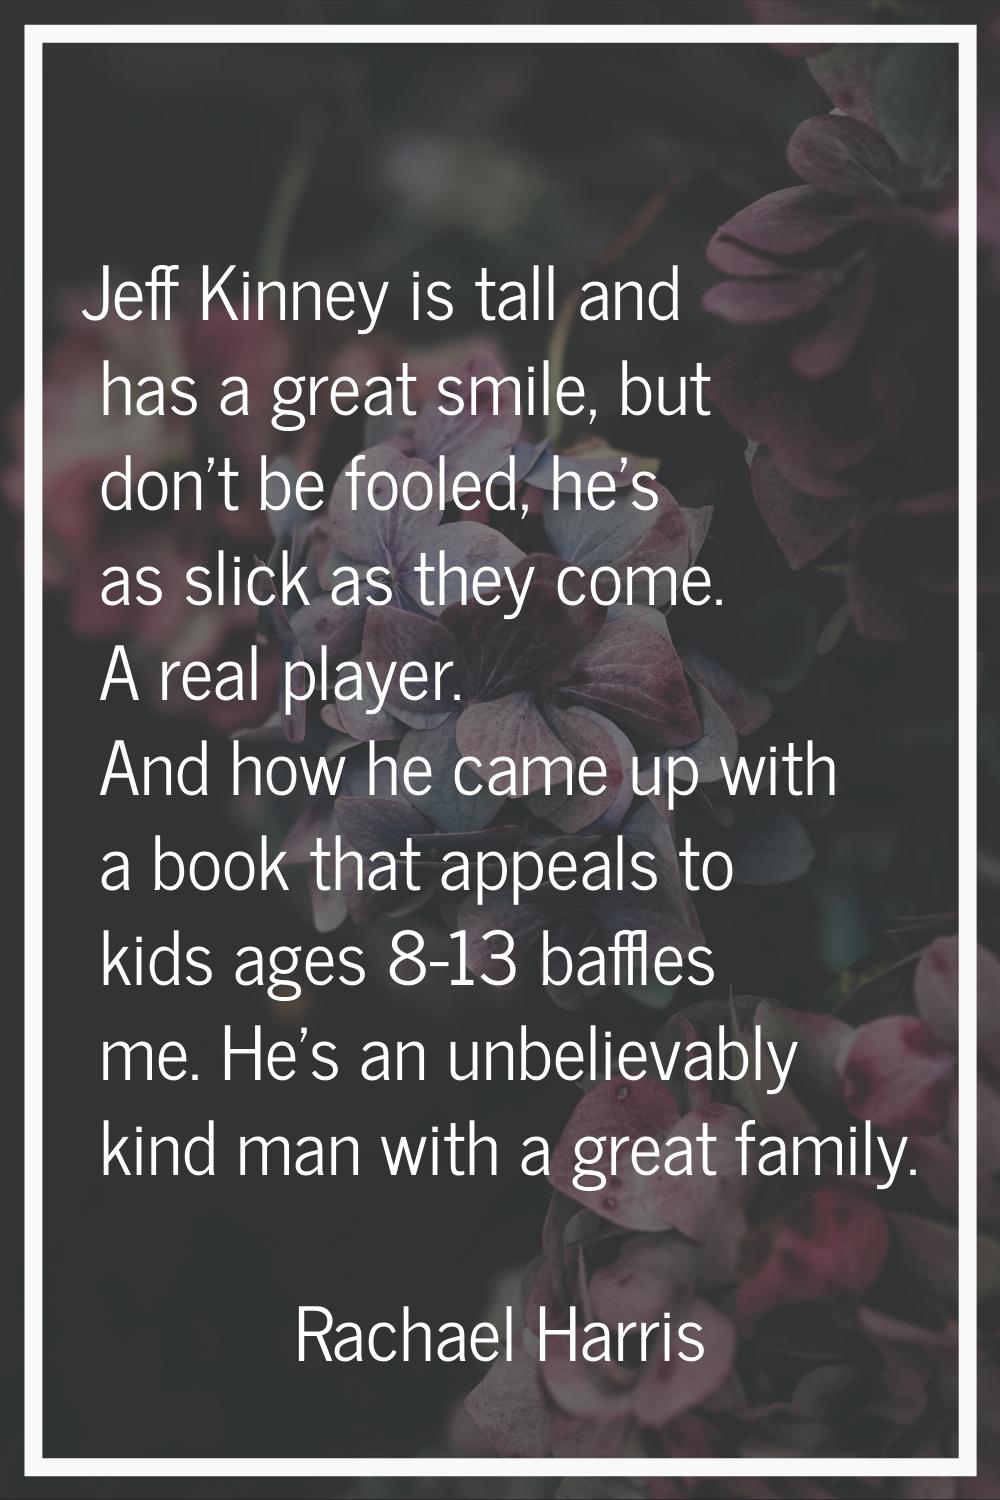 Jeff Kinney is tall and has a great smile, but don't be fooled, he's as slick as they come. A real 